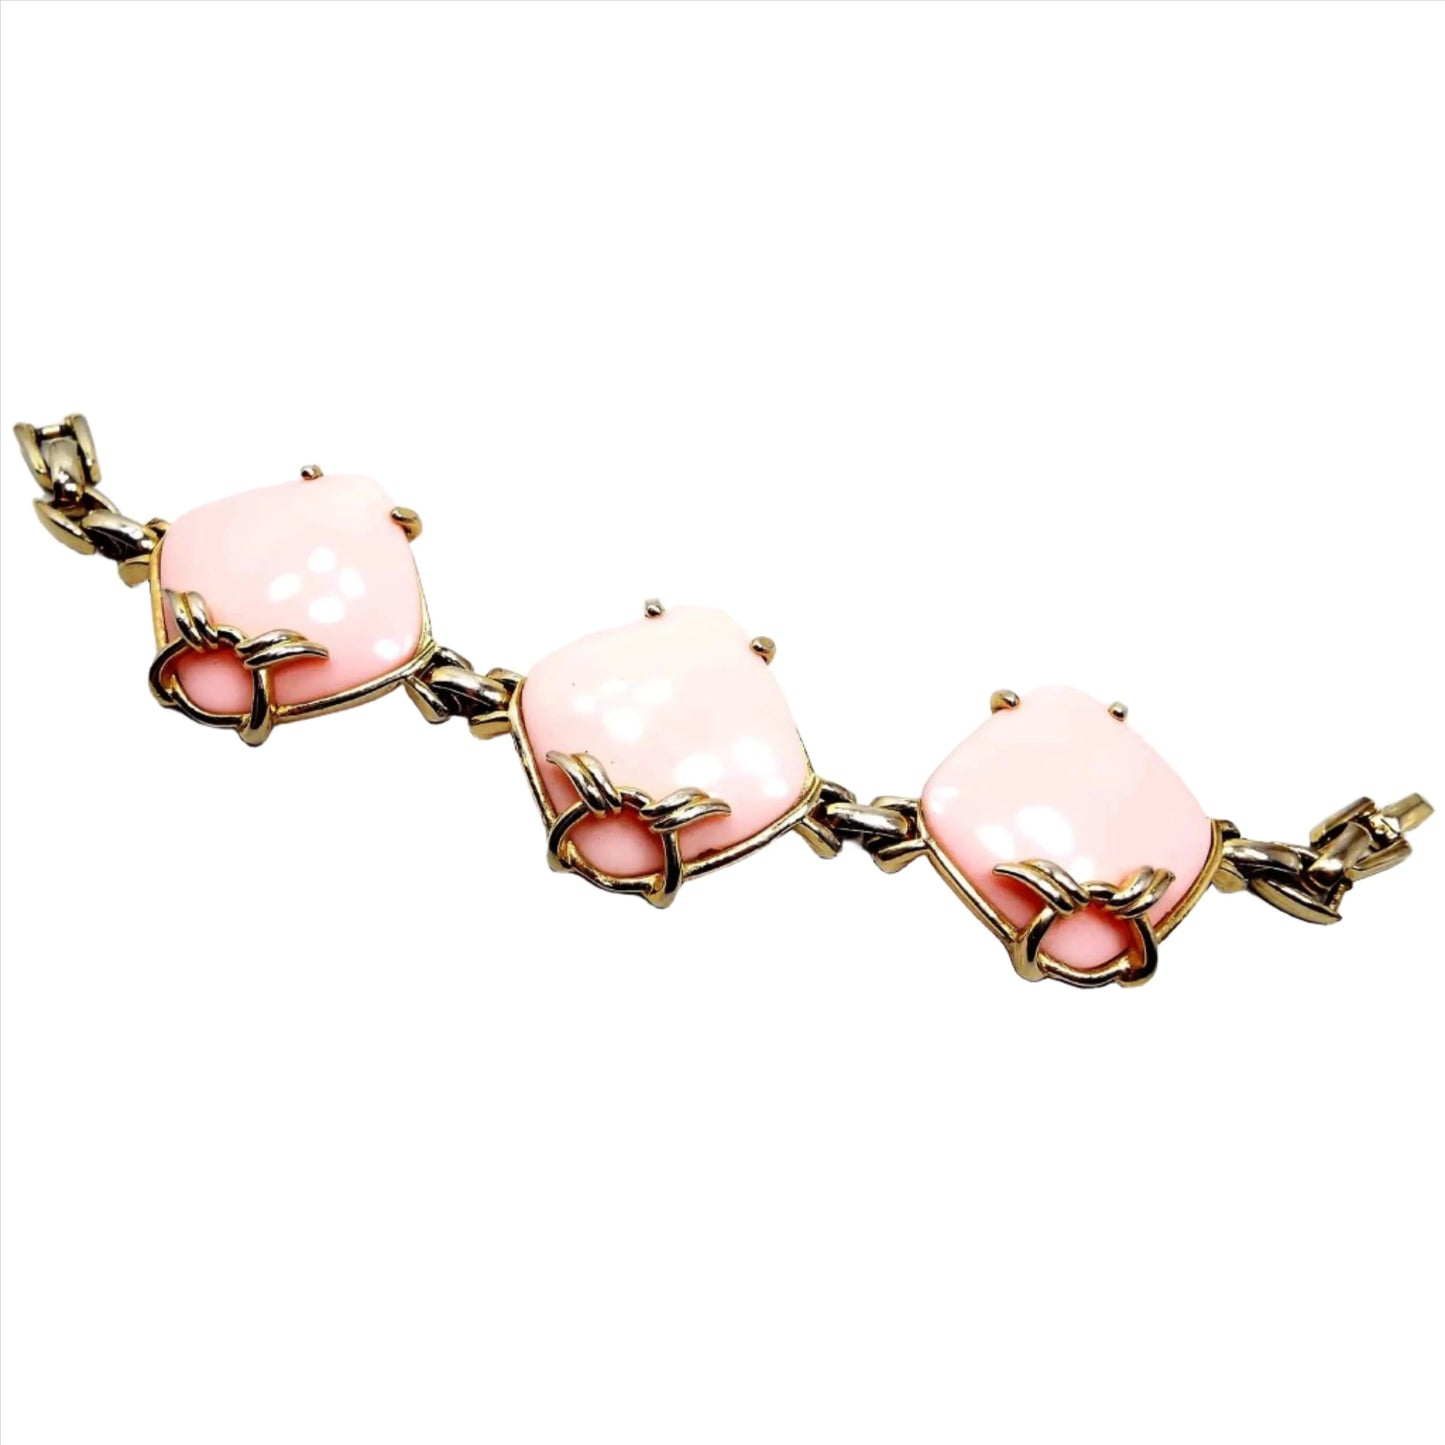 Top view of the Mid Century vintage link bracelet. The metal is gold tone in color. There are three large puffy style diamond shaped cabs in the middle that are light pink in color and made of plastic. There is a snap lock clasp at the end.